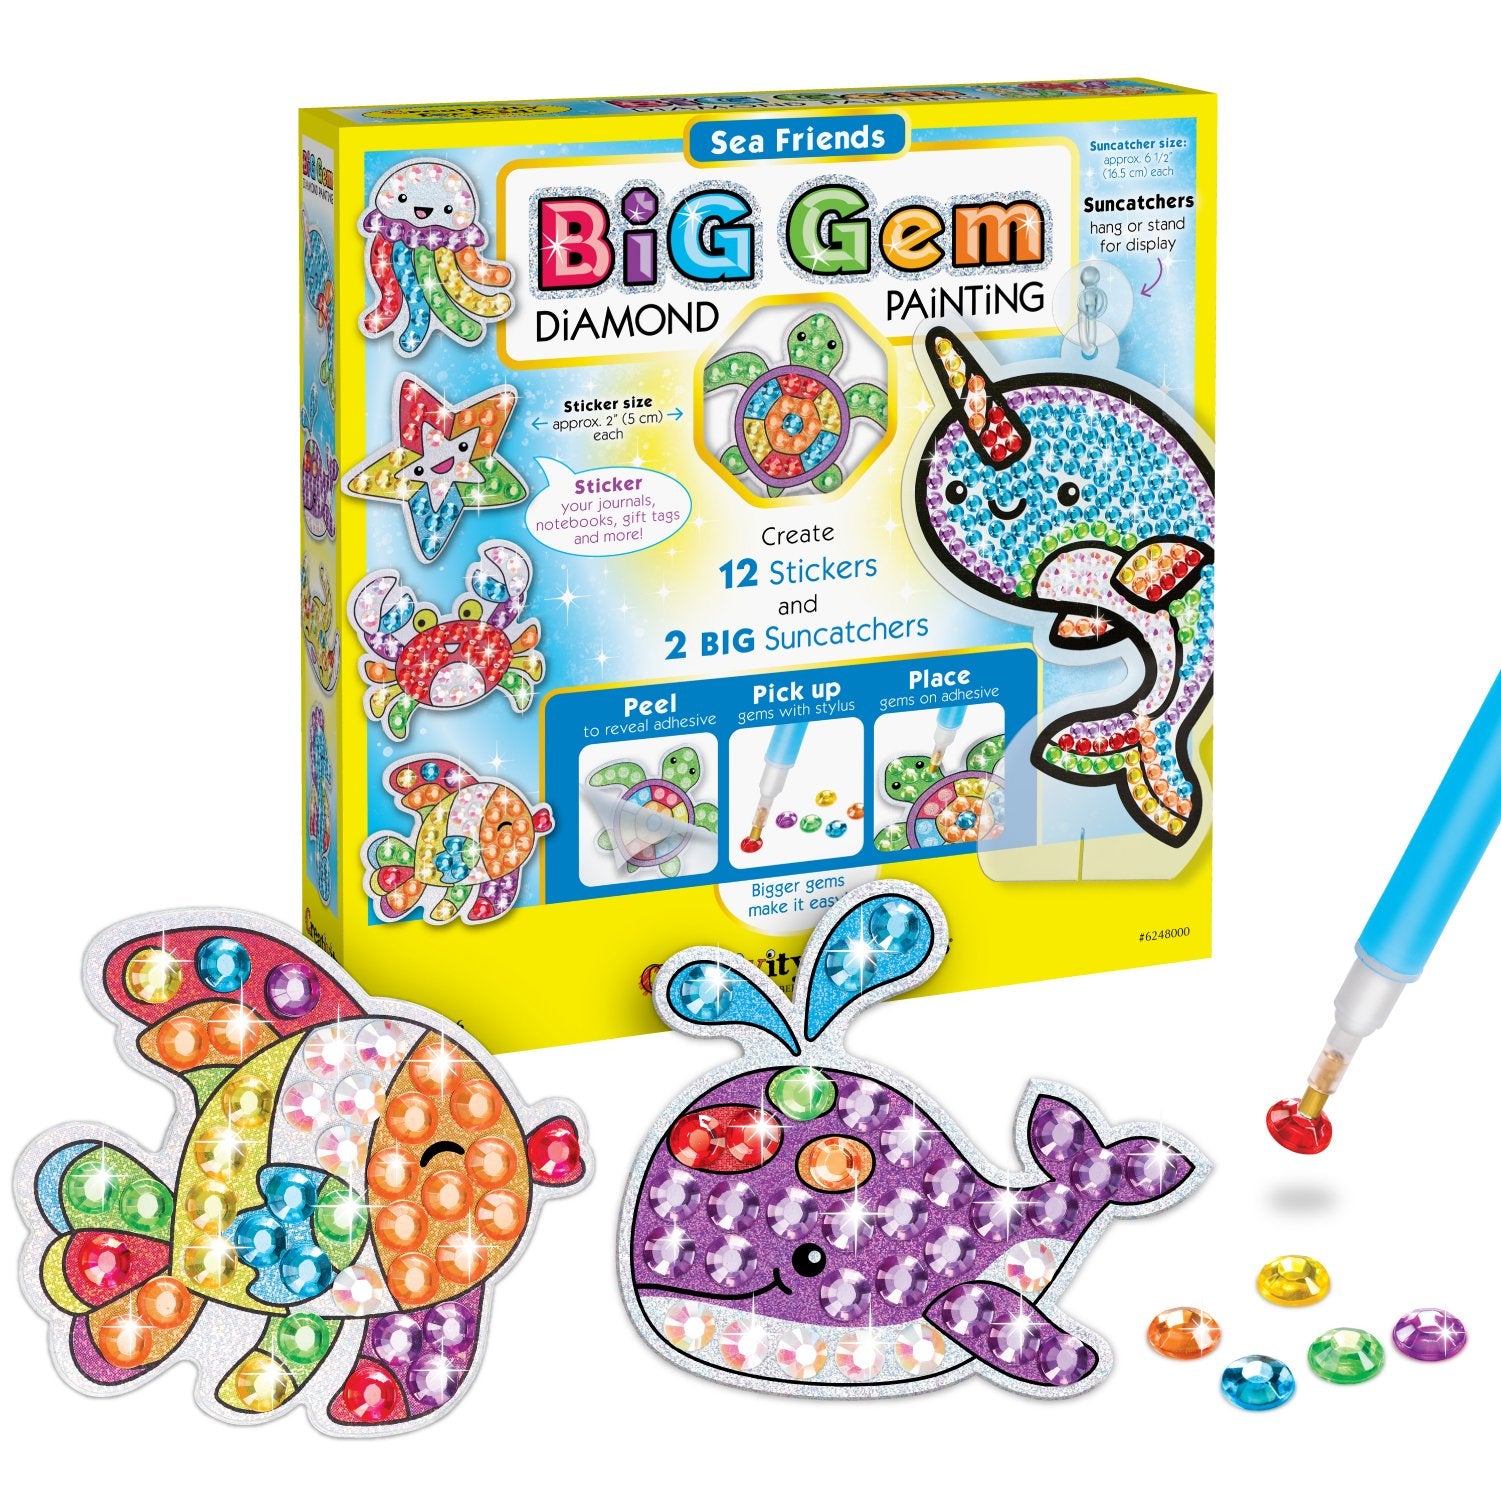  Diamond Painting Stickers Kits for Kids Big Gem Art Crafts for Girls  Ages 8-12 DIY Paint by Numbers Kits Mosaic with Suncatchers for Kids Adults  Beginners : Toys & Games